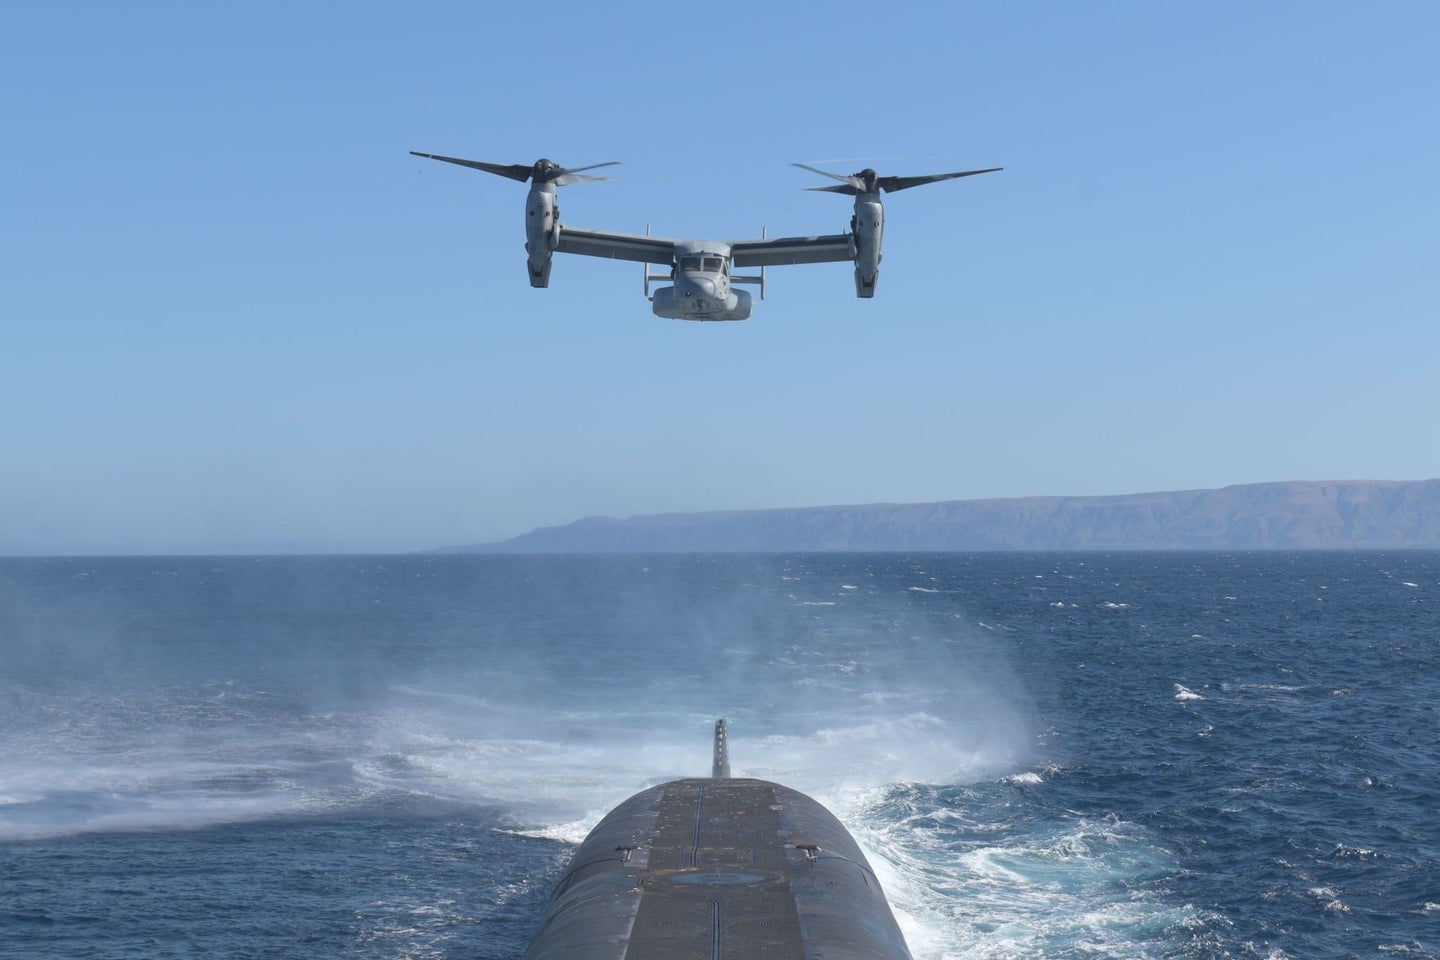 An American ballistic missile submarine received supplies from an MV-22 Osprey aircraft in August, 2018.